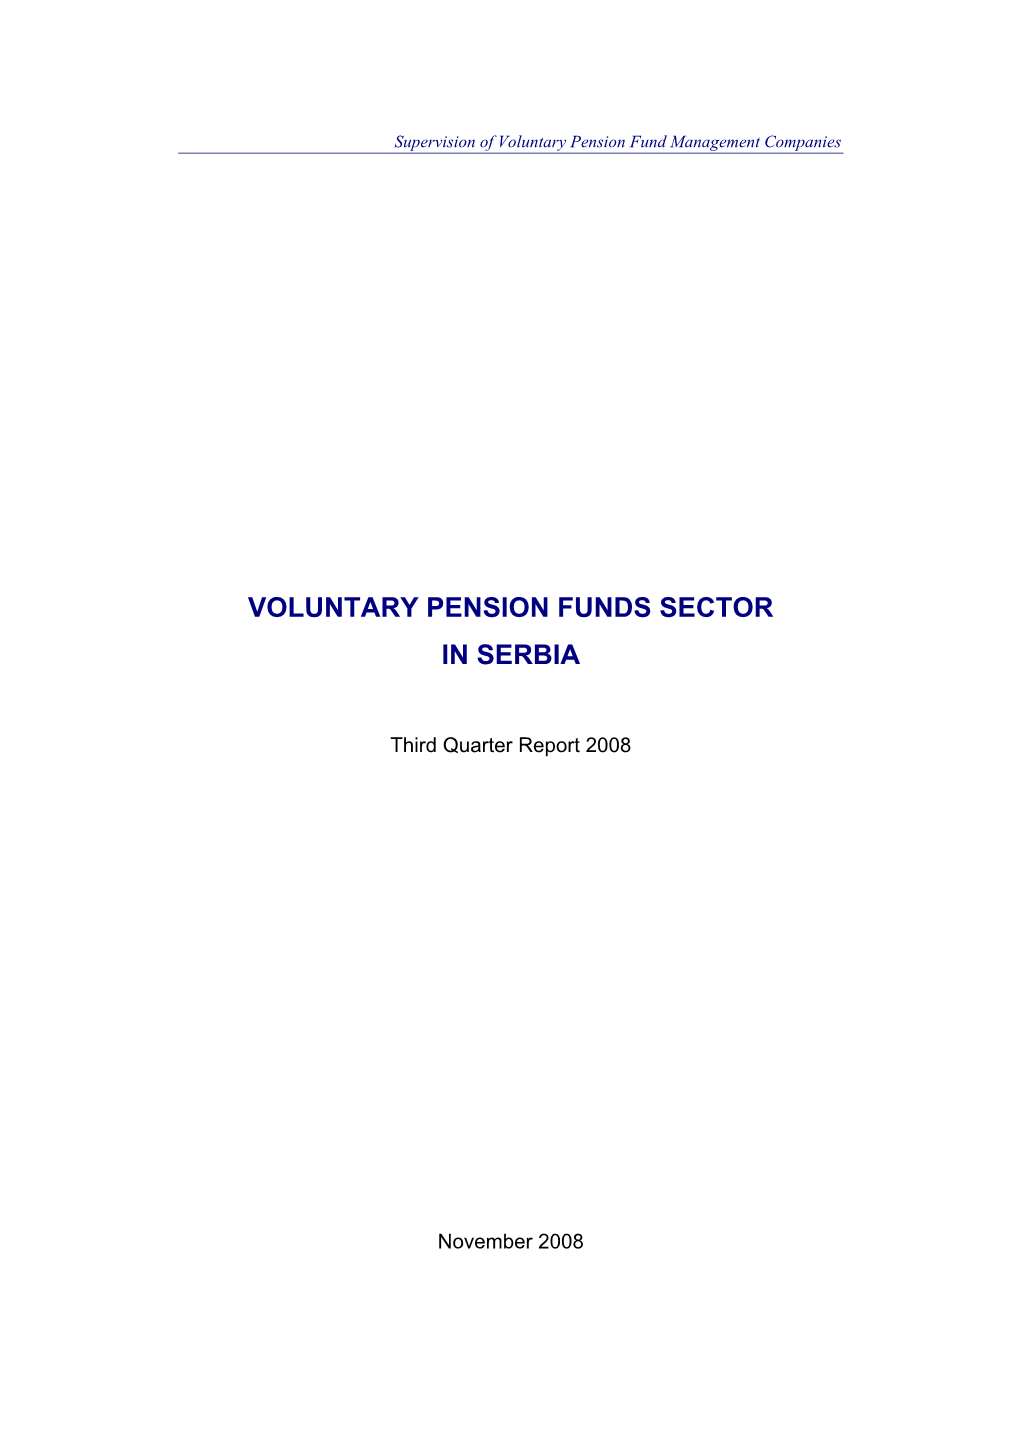 Voluntary Pension Funds Sector in Serbia